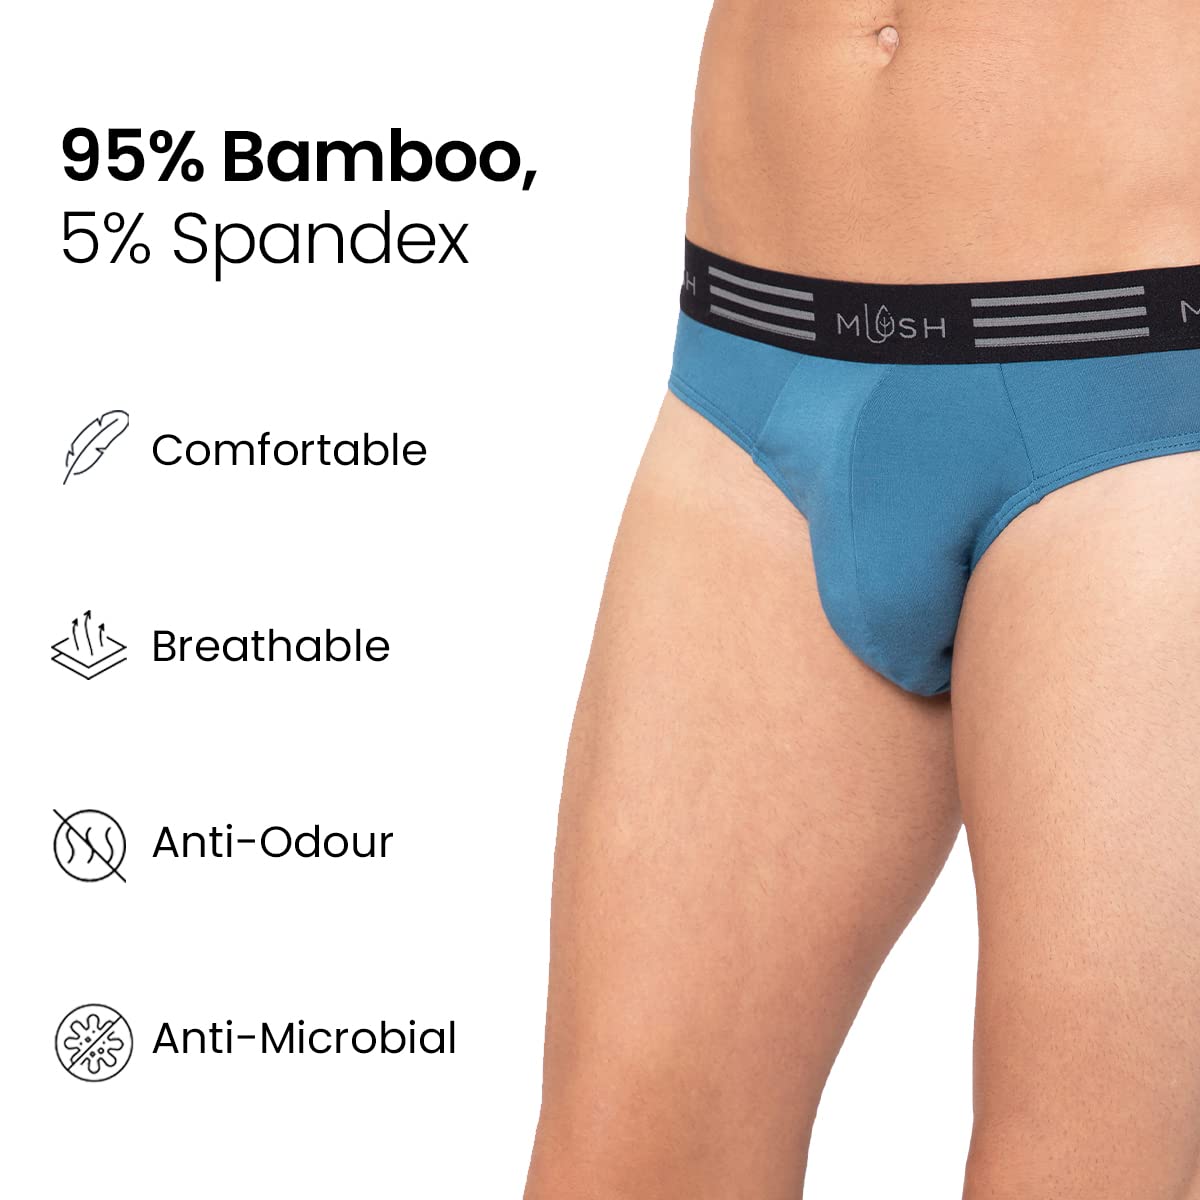 Mush Ultra Soft, Breathable, Feather Light Men's Bamboo Brief || Naturally Anti-Odor and Anti-Microbial Bamboo Innerwear Pack of 2 (XL, Blue and Grey)